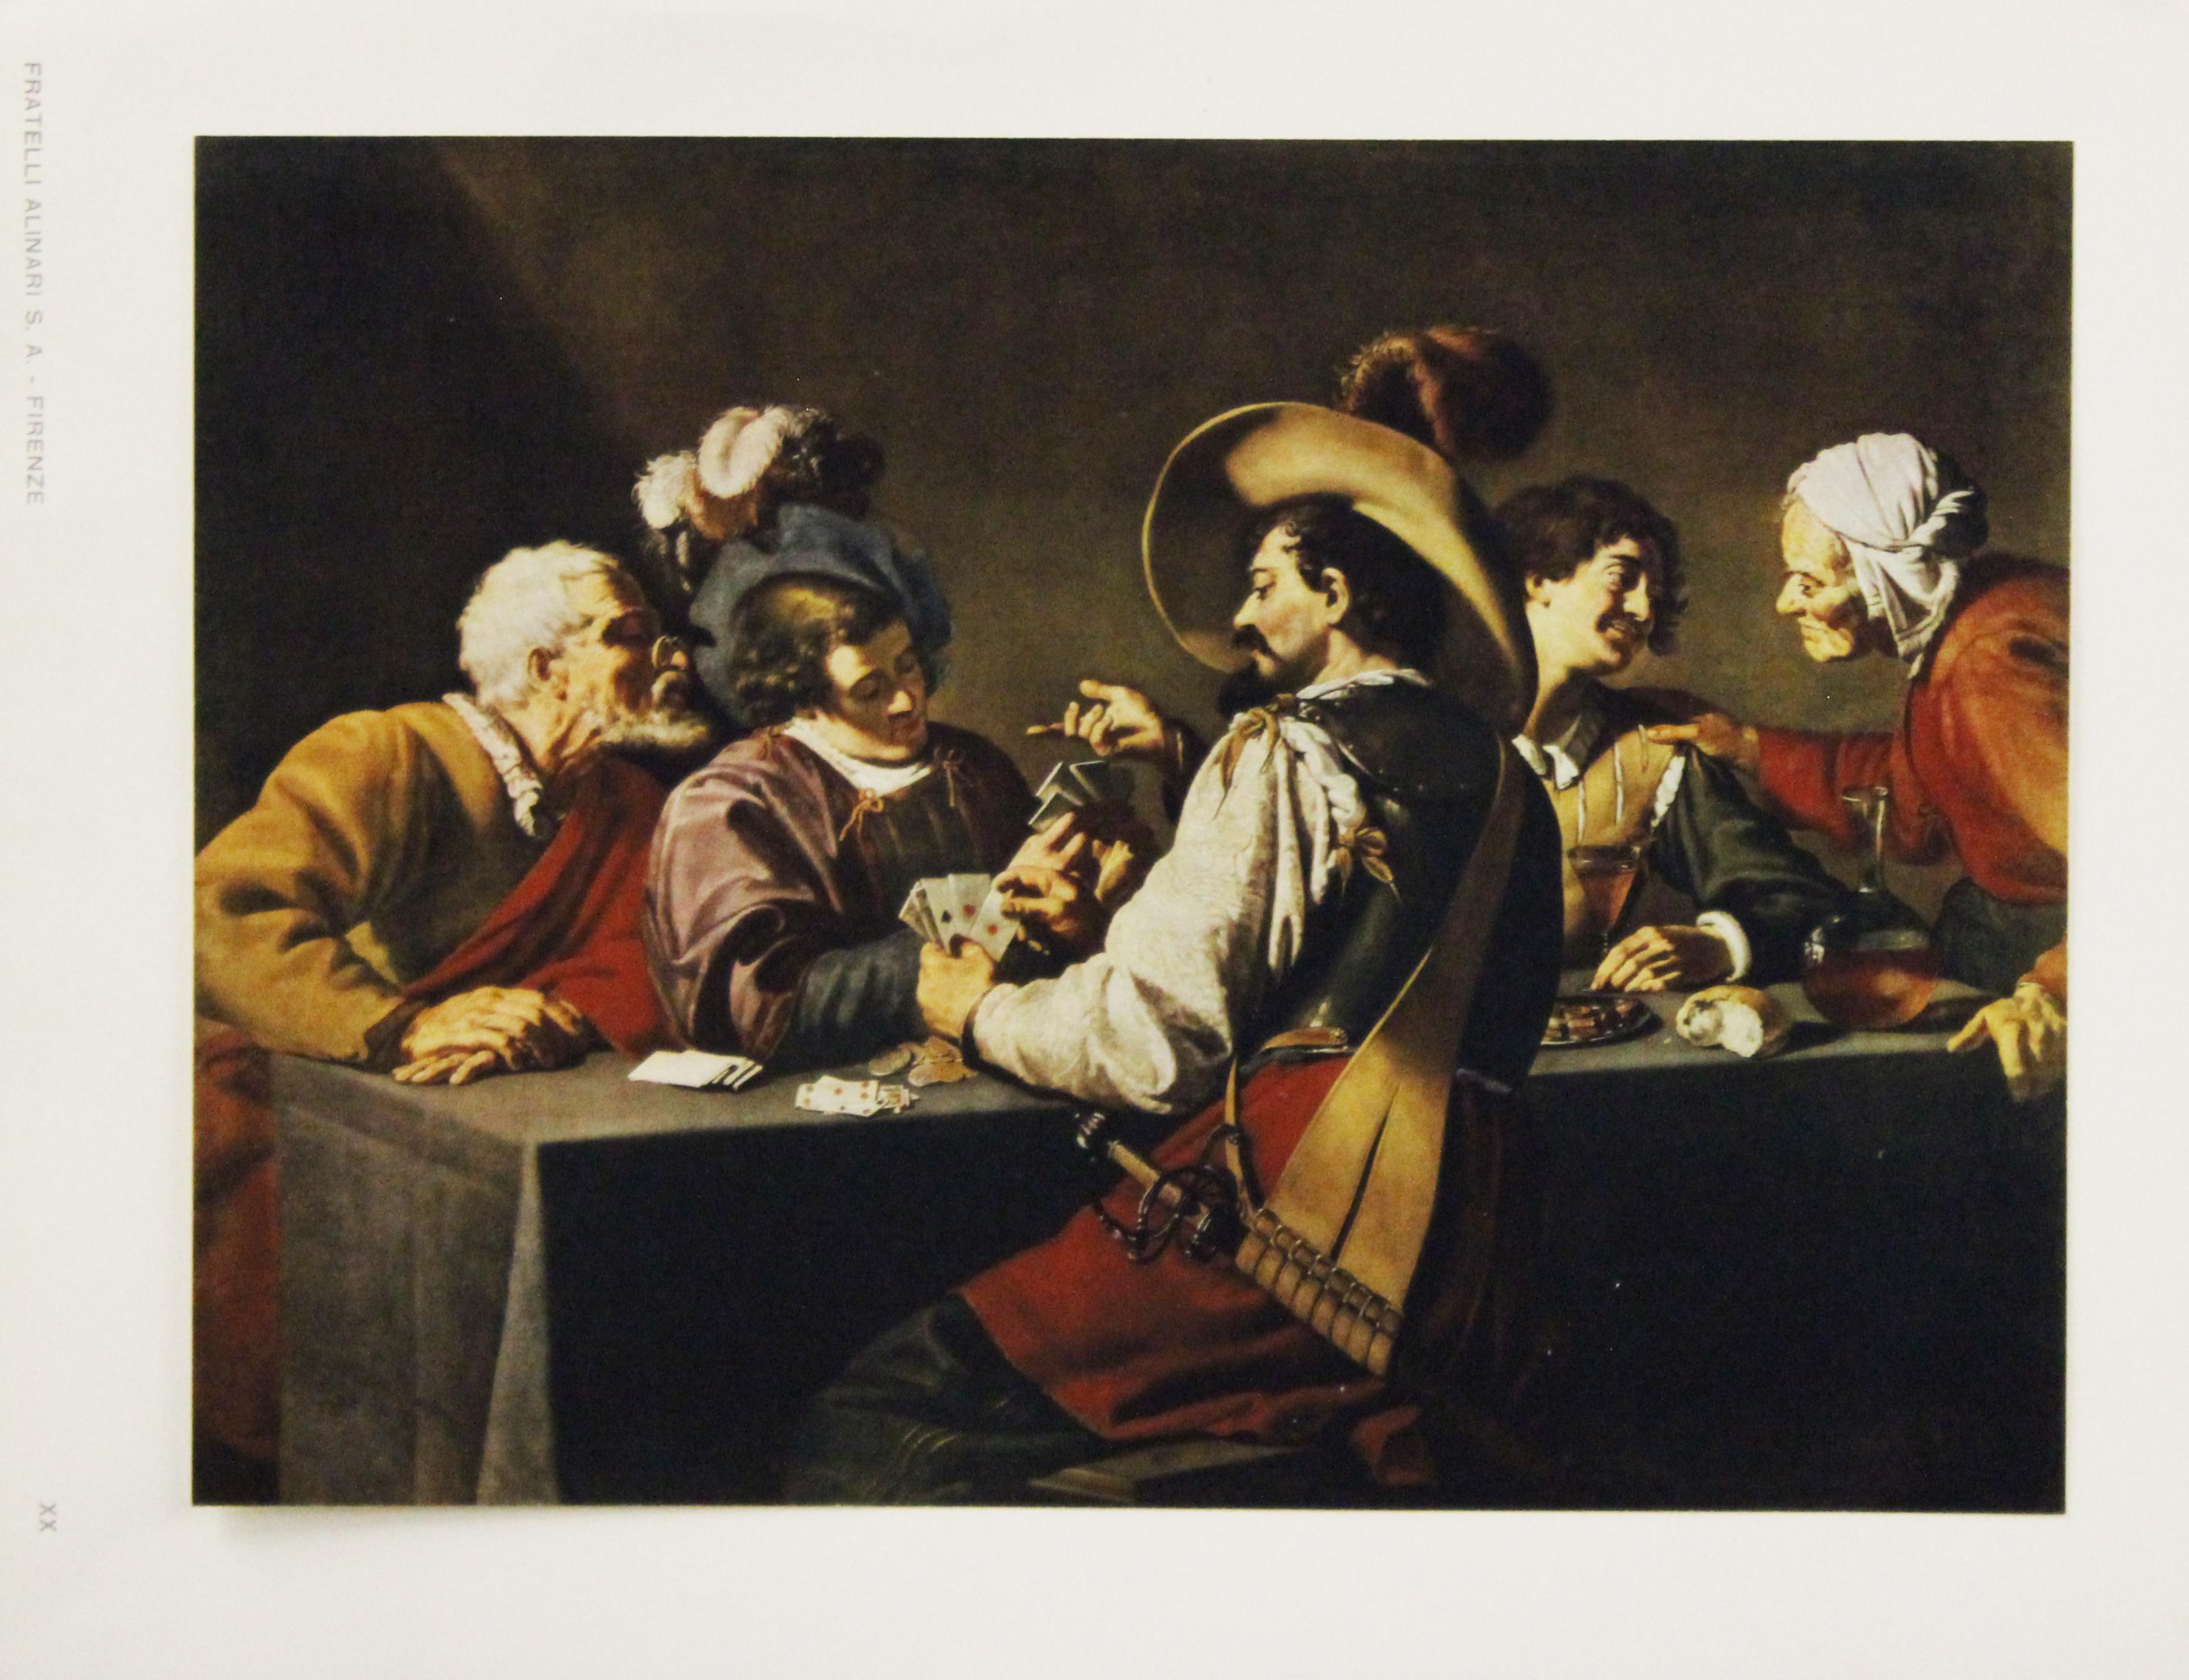 Theodor Rombouts Portrait Print - The Gamblers-Poster. Printed in Italy-Fratelli Alinari S.A. Firenze. 